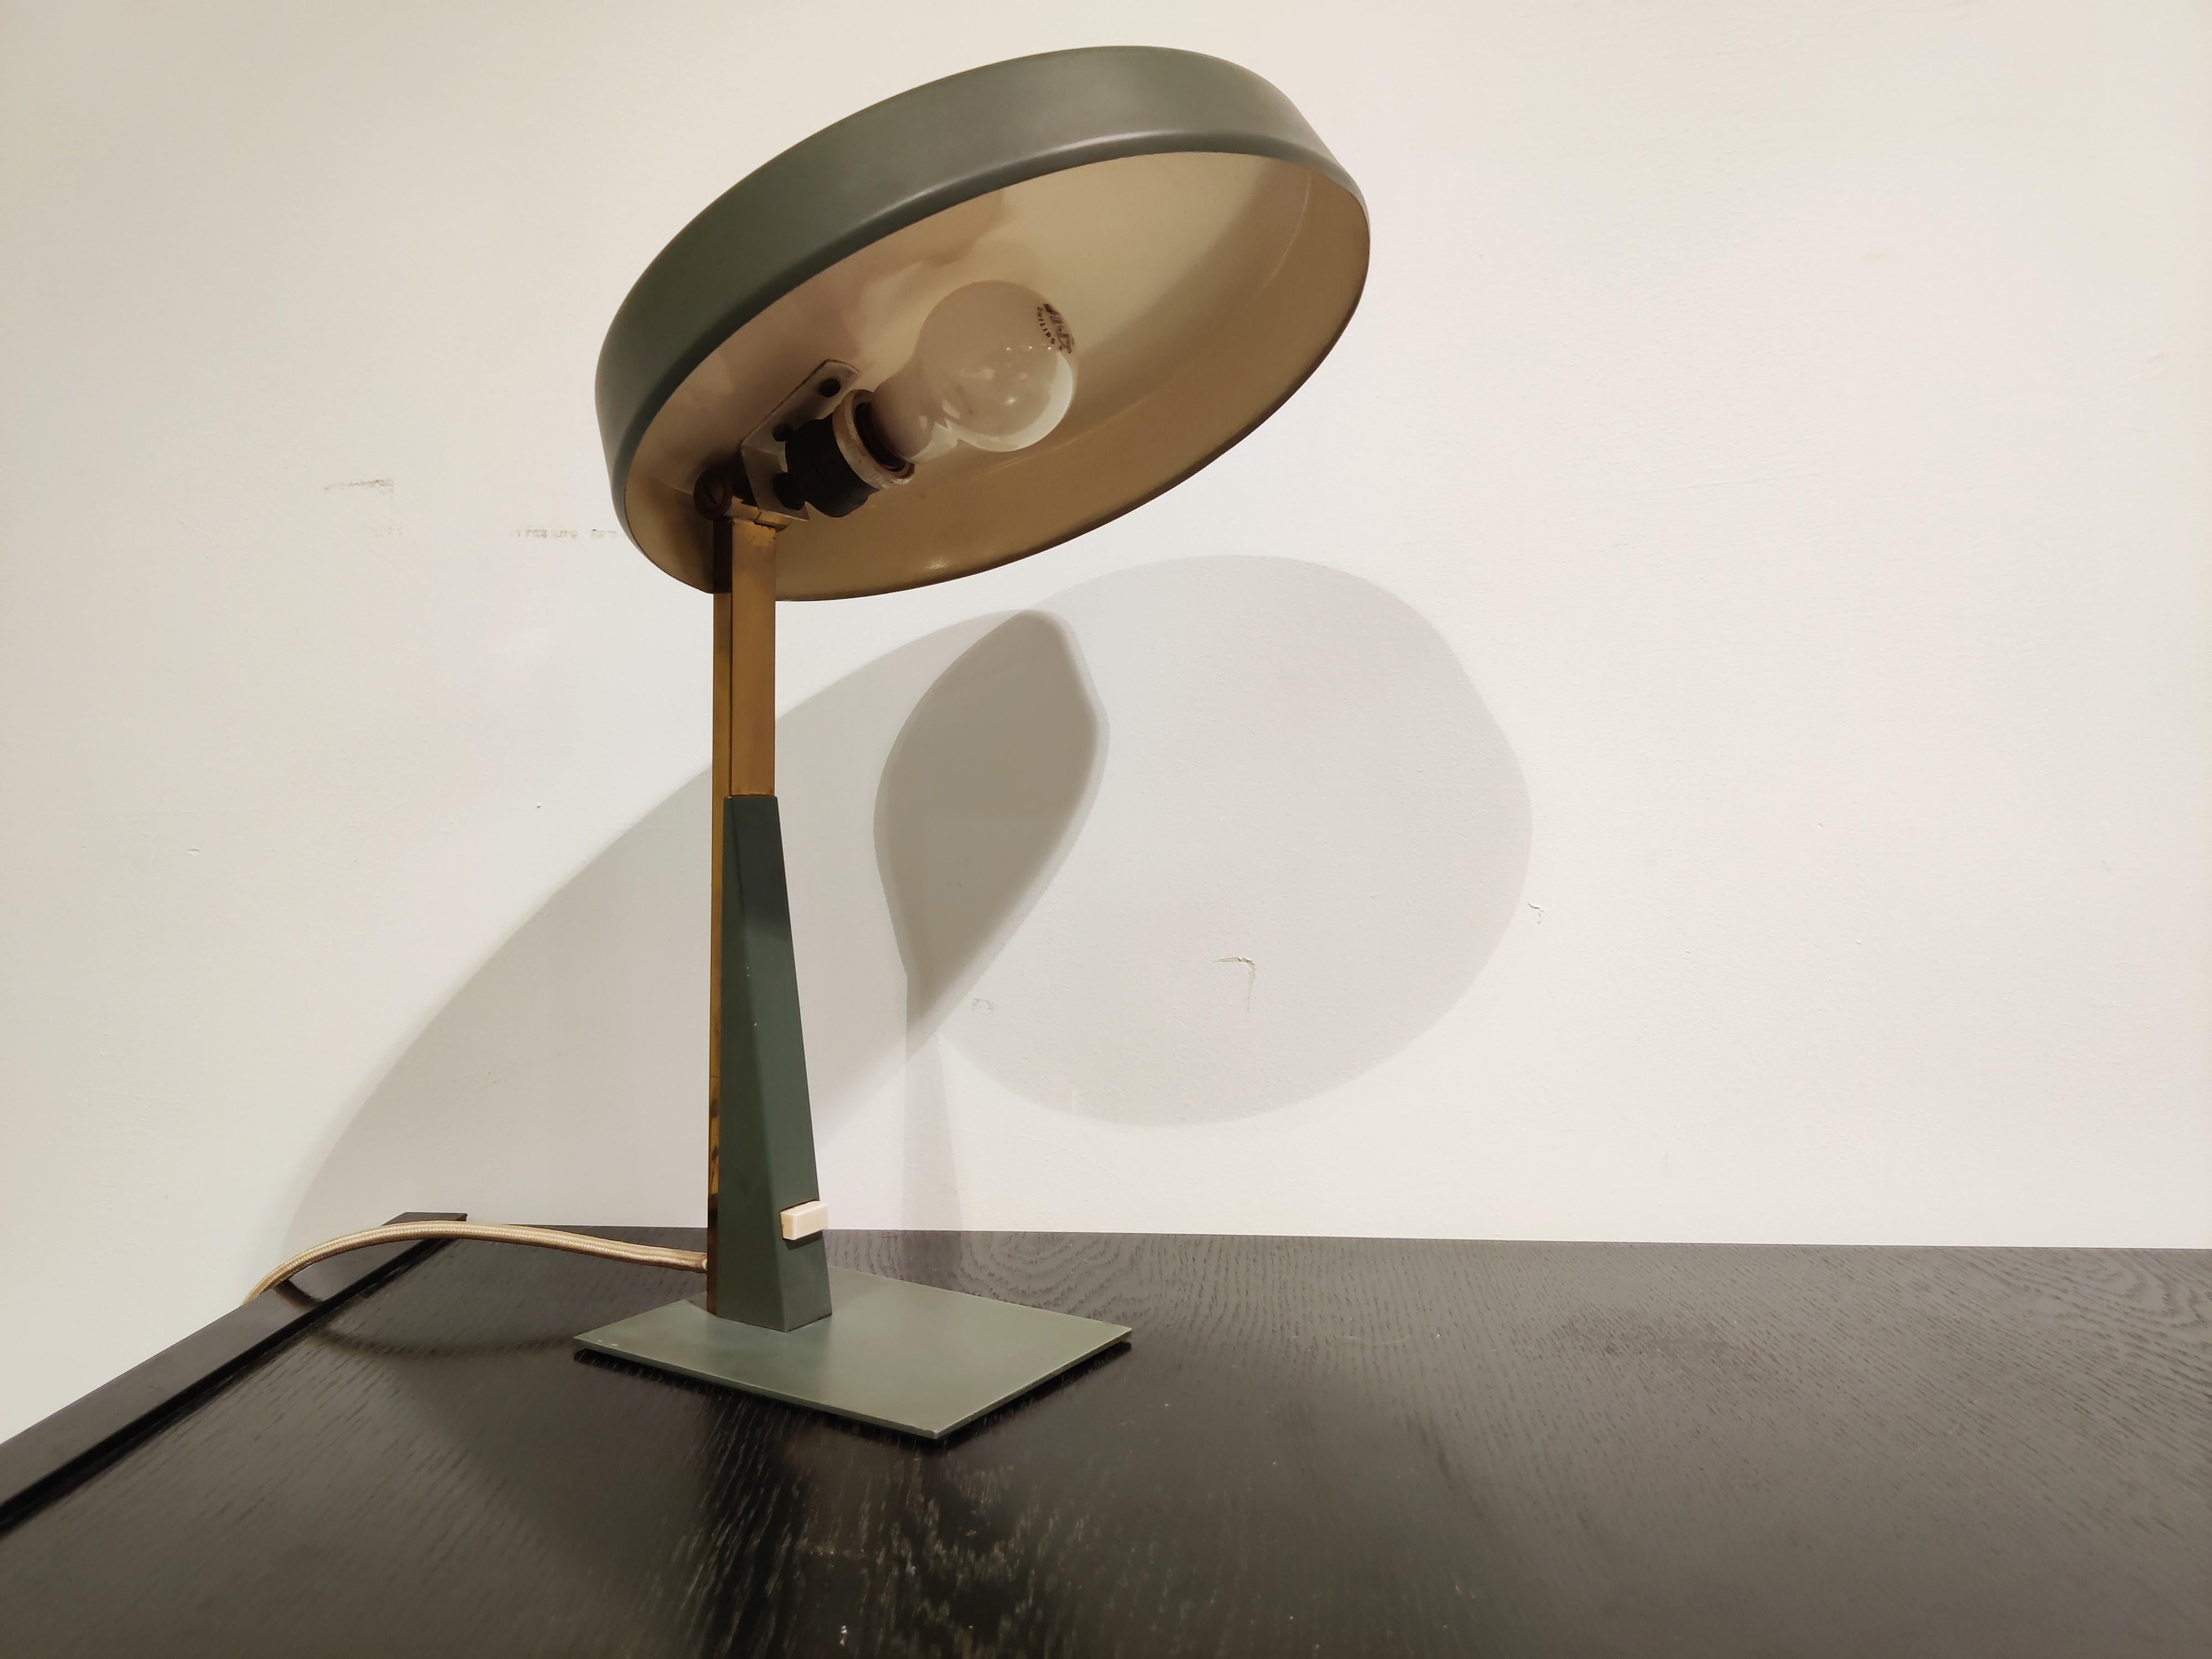 Rare green metal and brass desk lamp designed by Louis Kalff for Philips.

The lamp is in a good original condition without any noticeable damages.

The shade can be adjusted.

It really stands out with a simple and abstract design.

This